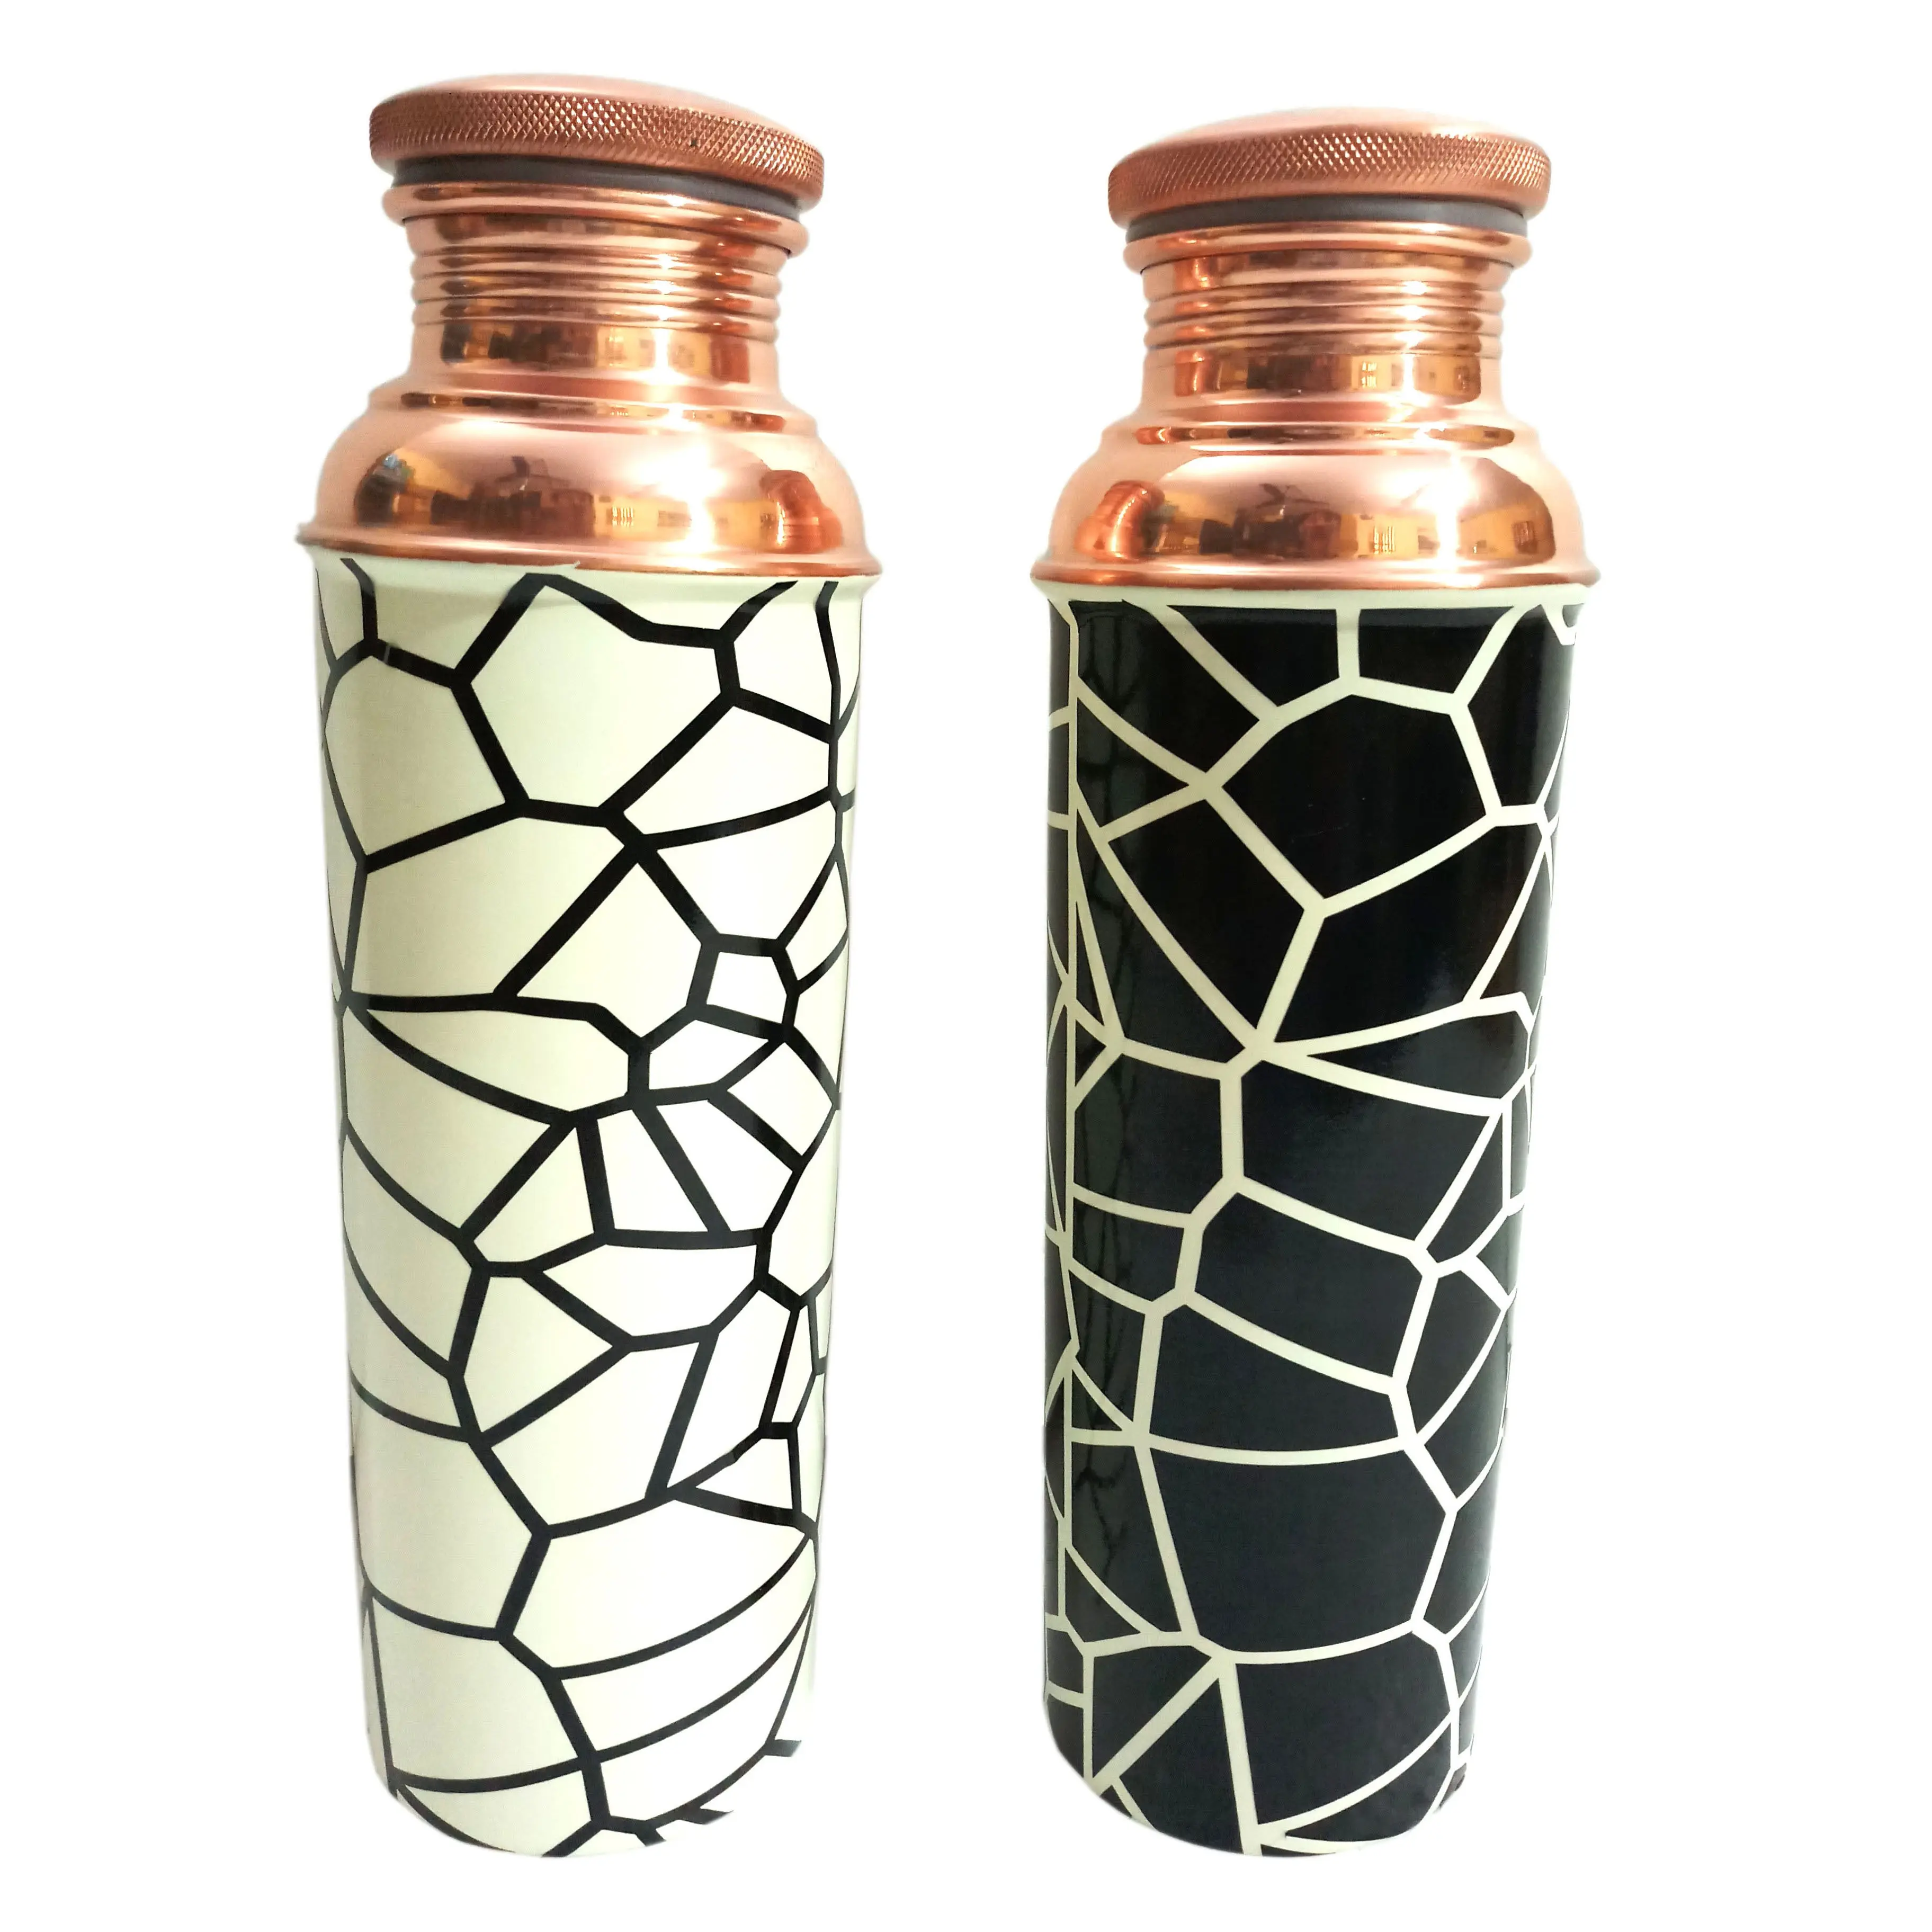 Elegant texture painted copper water bottle suppliers of printed copper water drinking bottle at low price BY INDIAN METAL WORLD